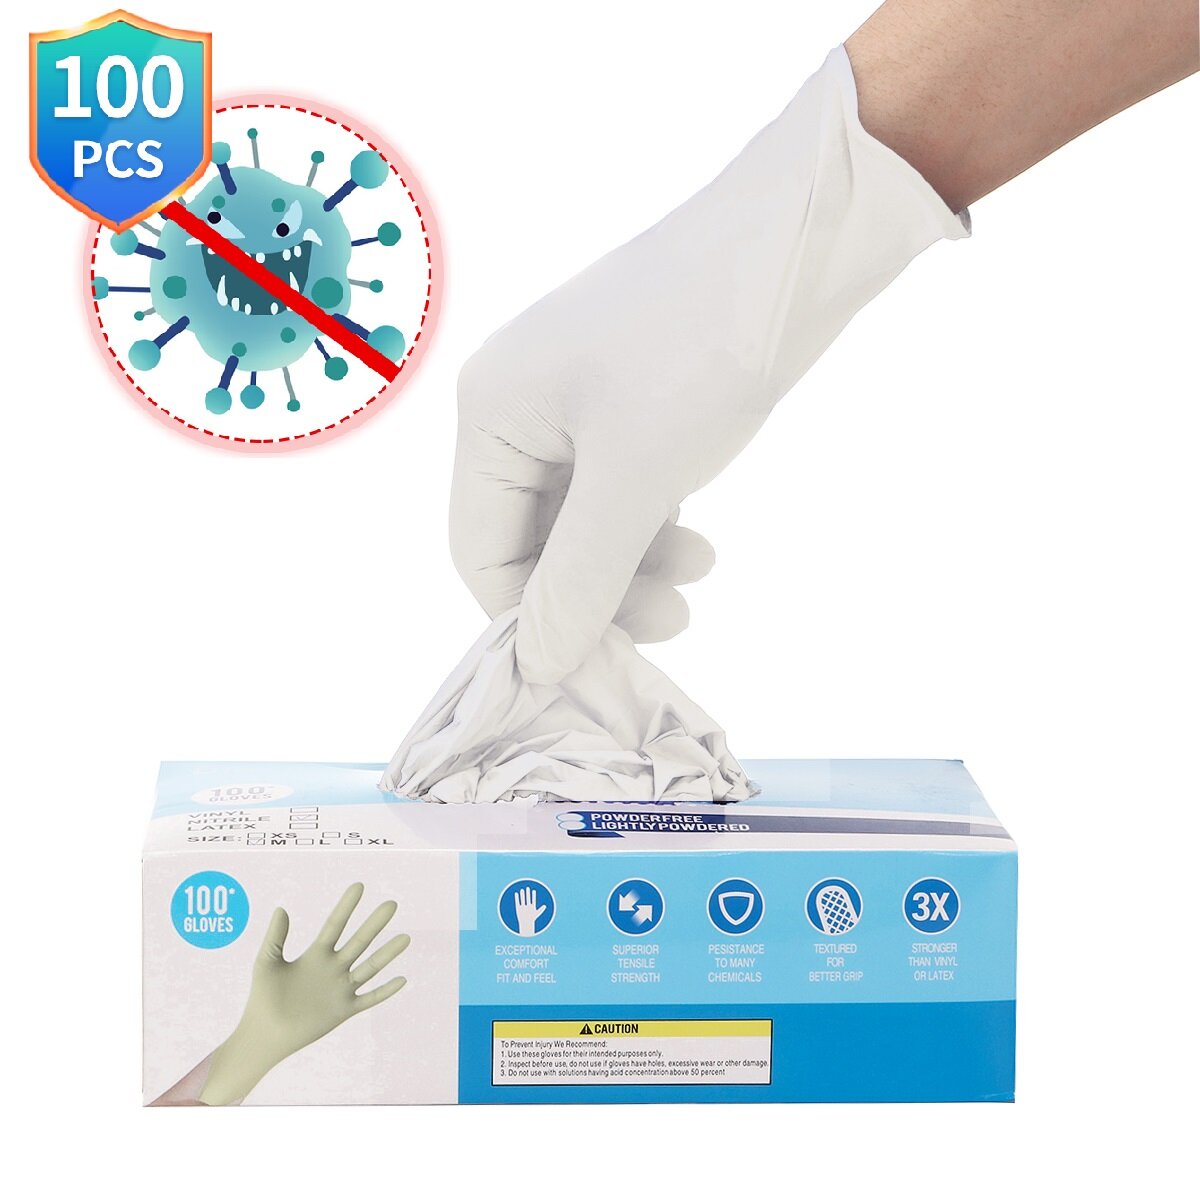 100 Pcs Nitrile Disposable Gloves Powder Free Rubber Latex Free Sterile Gloves for Picnic Food Hygiene House Cleaning